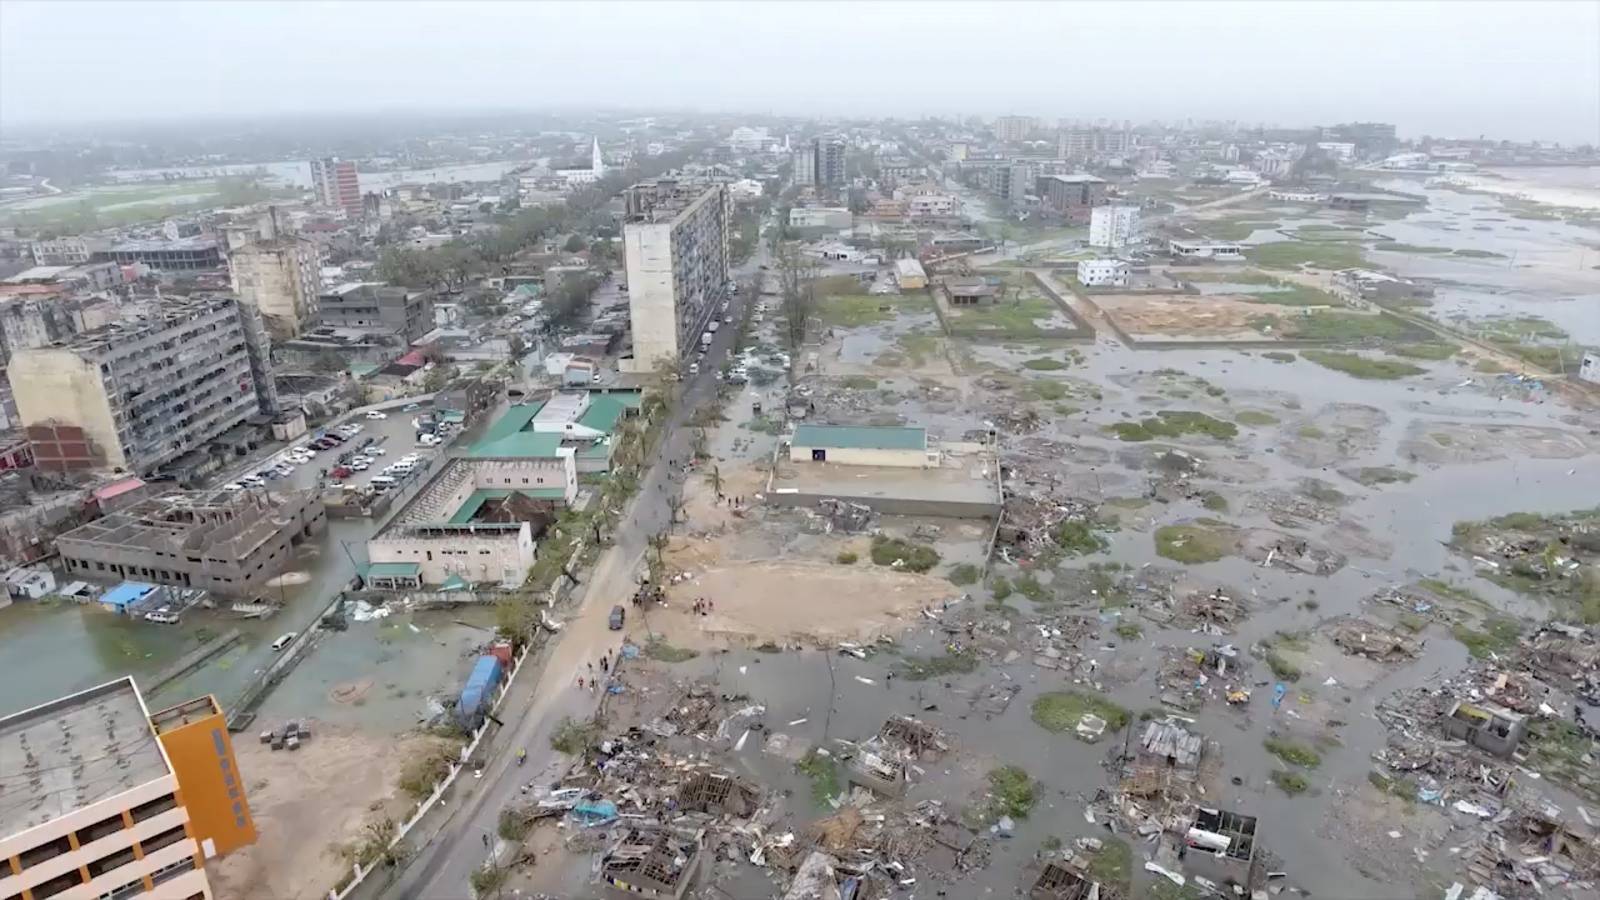 General view of damage after cyclone swept through Beira